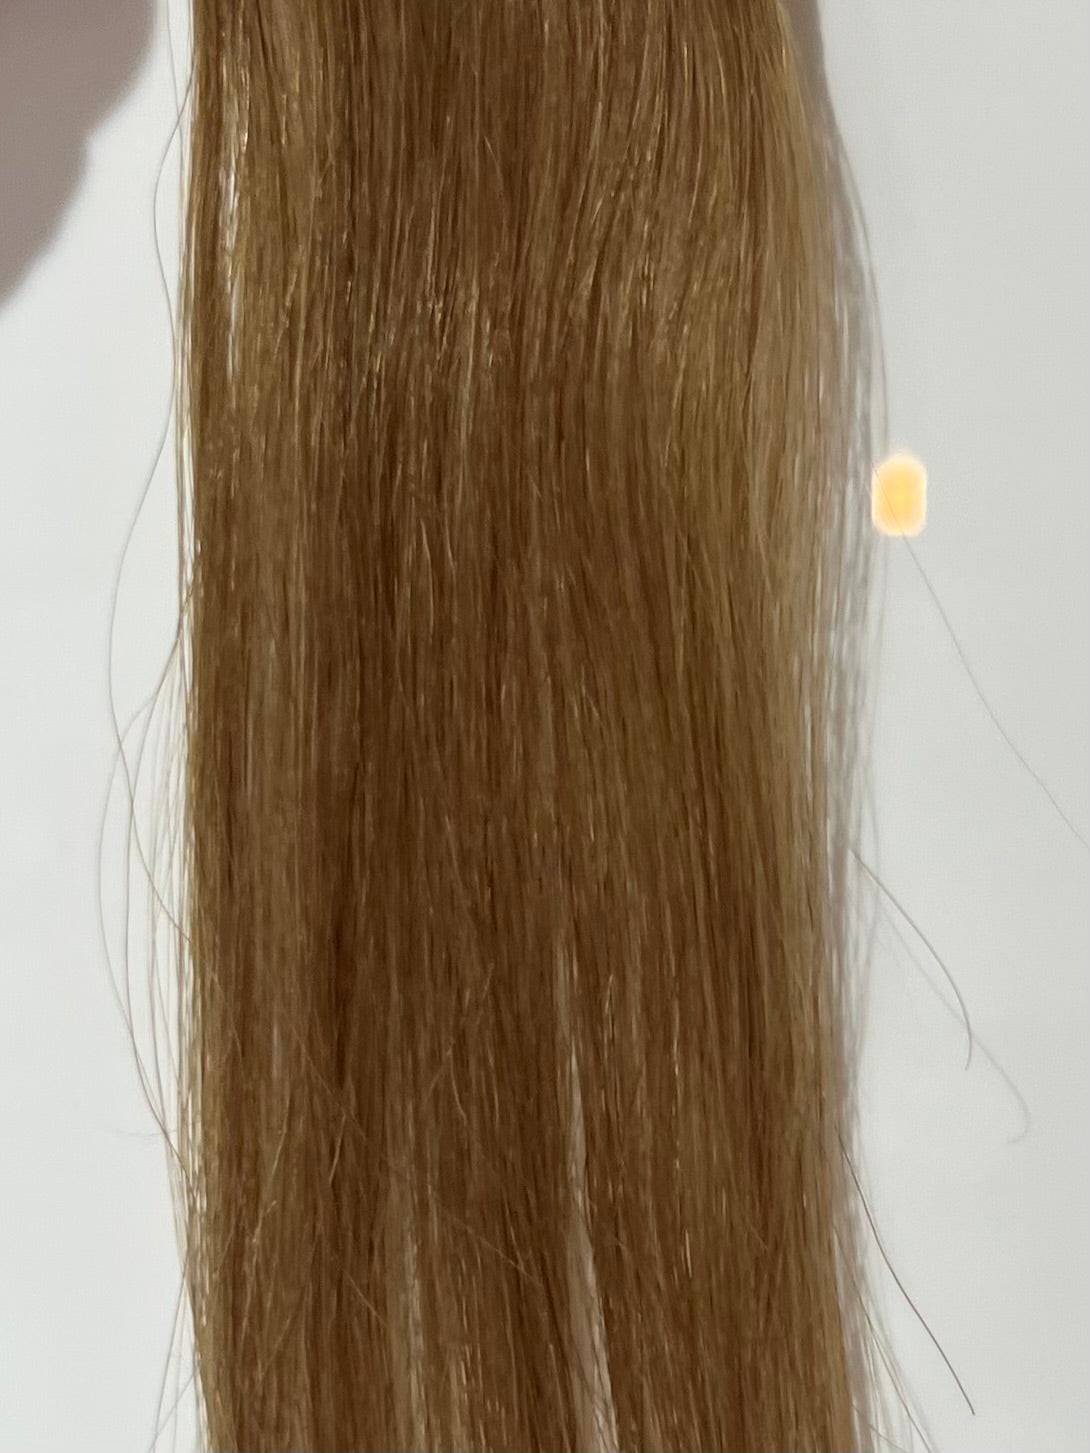 RETAIL HALO EXTENSIONS - NATURAL - LIGHT WARM BROWN